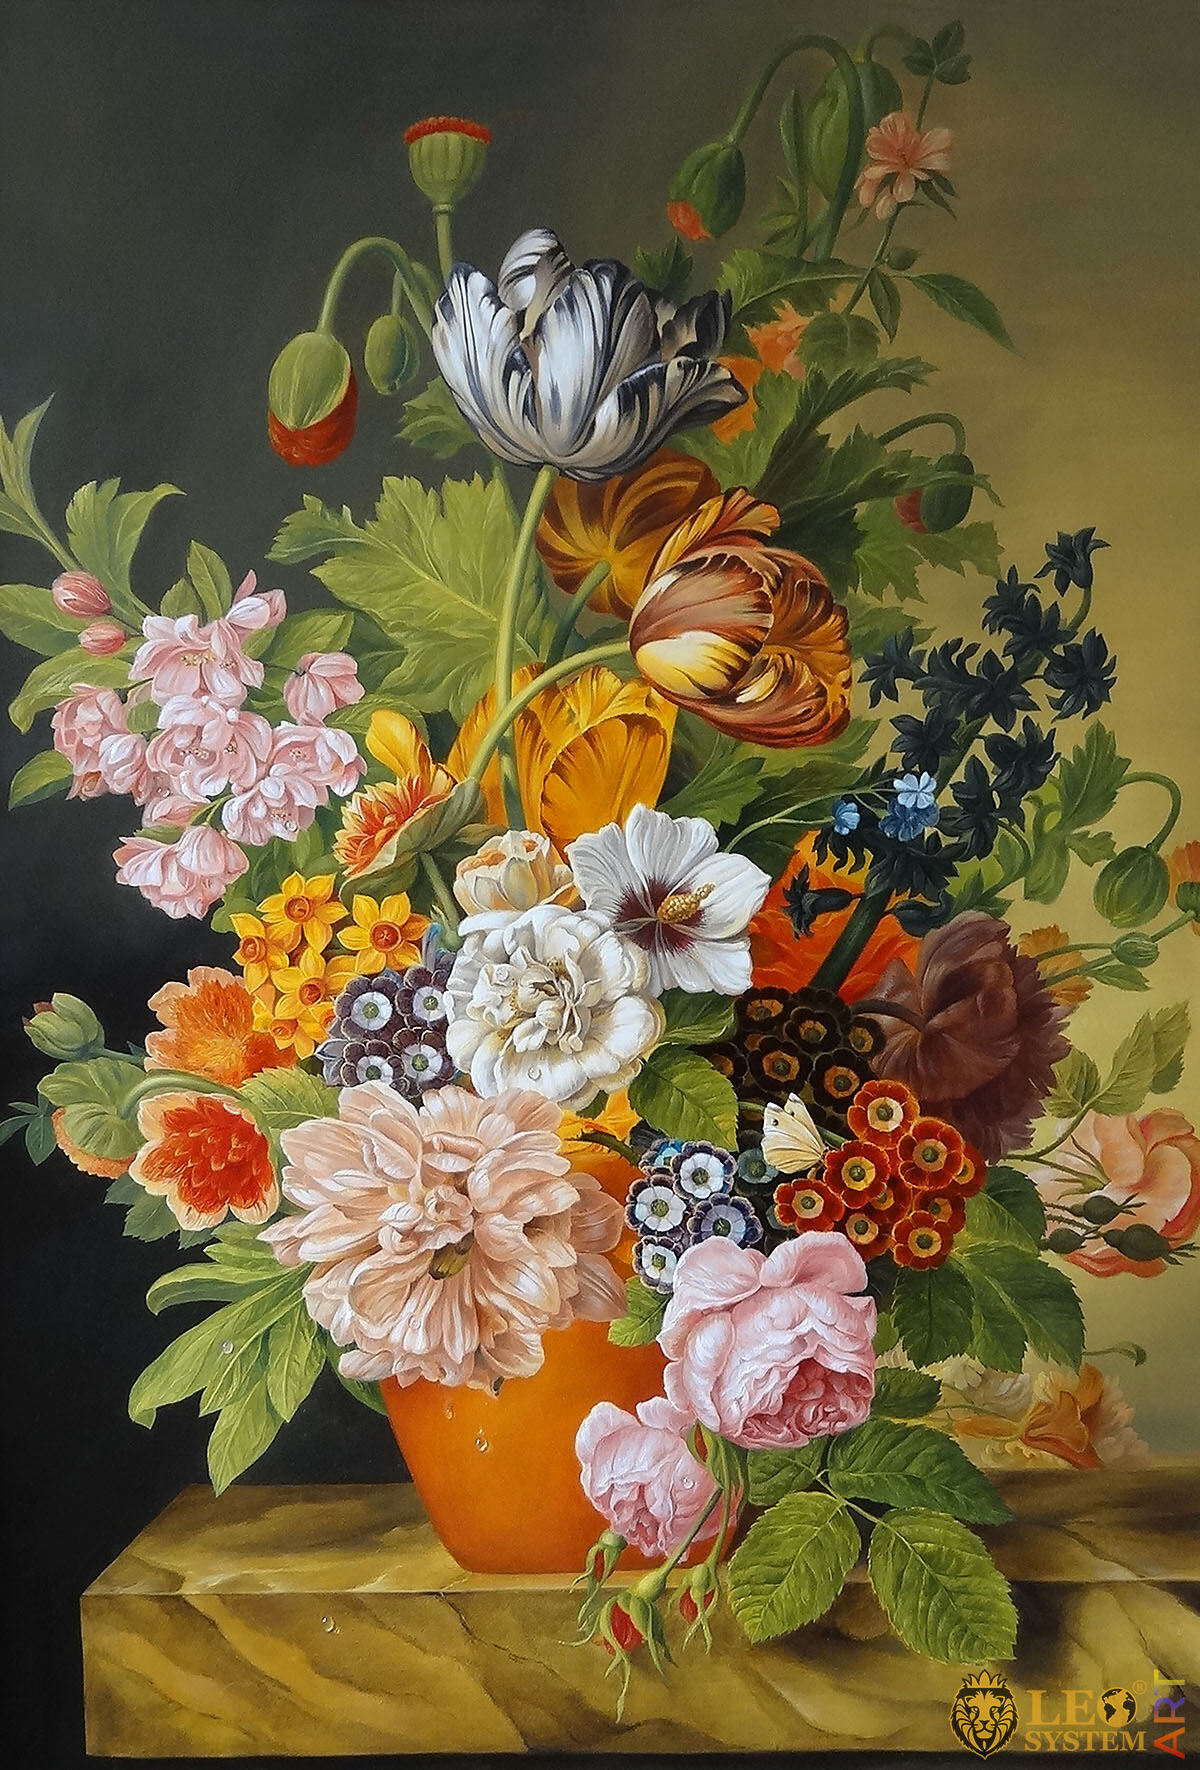 Painting with a set of amazing flowers